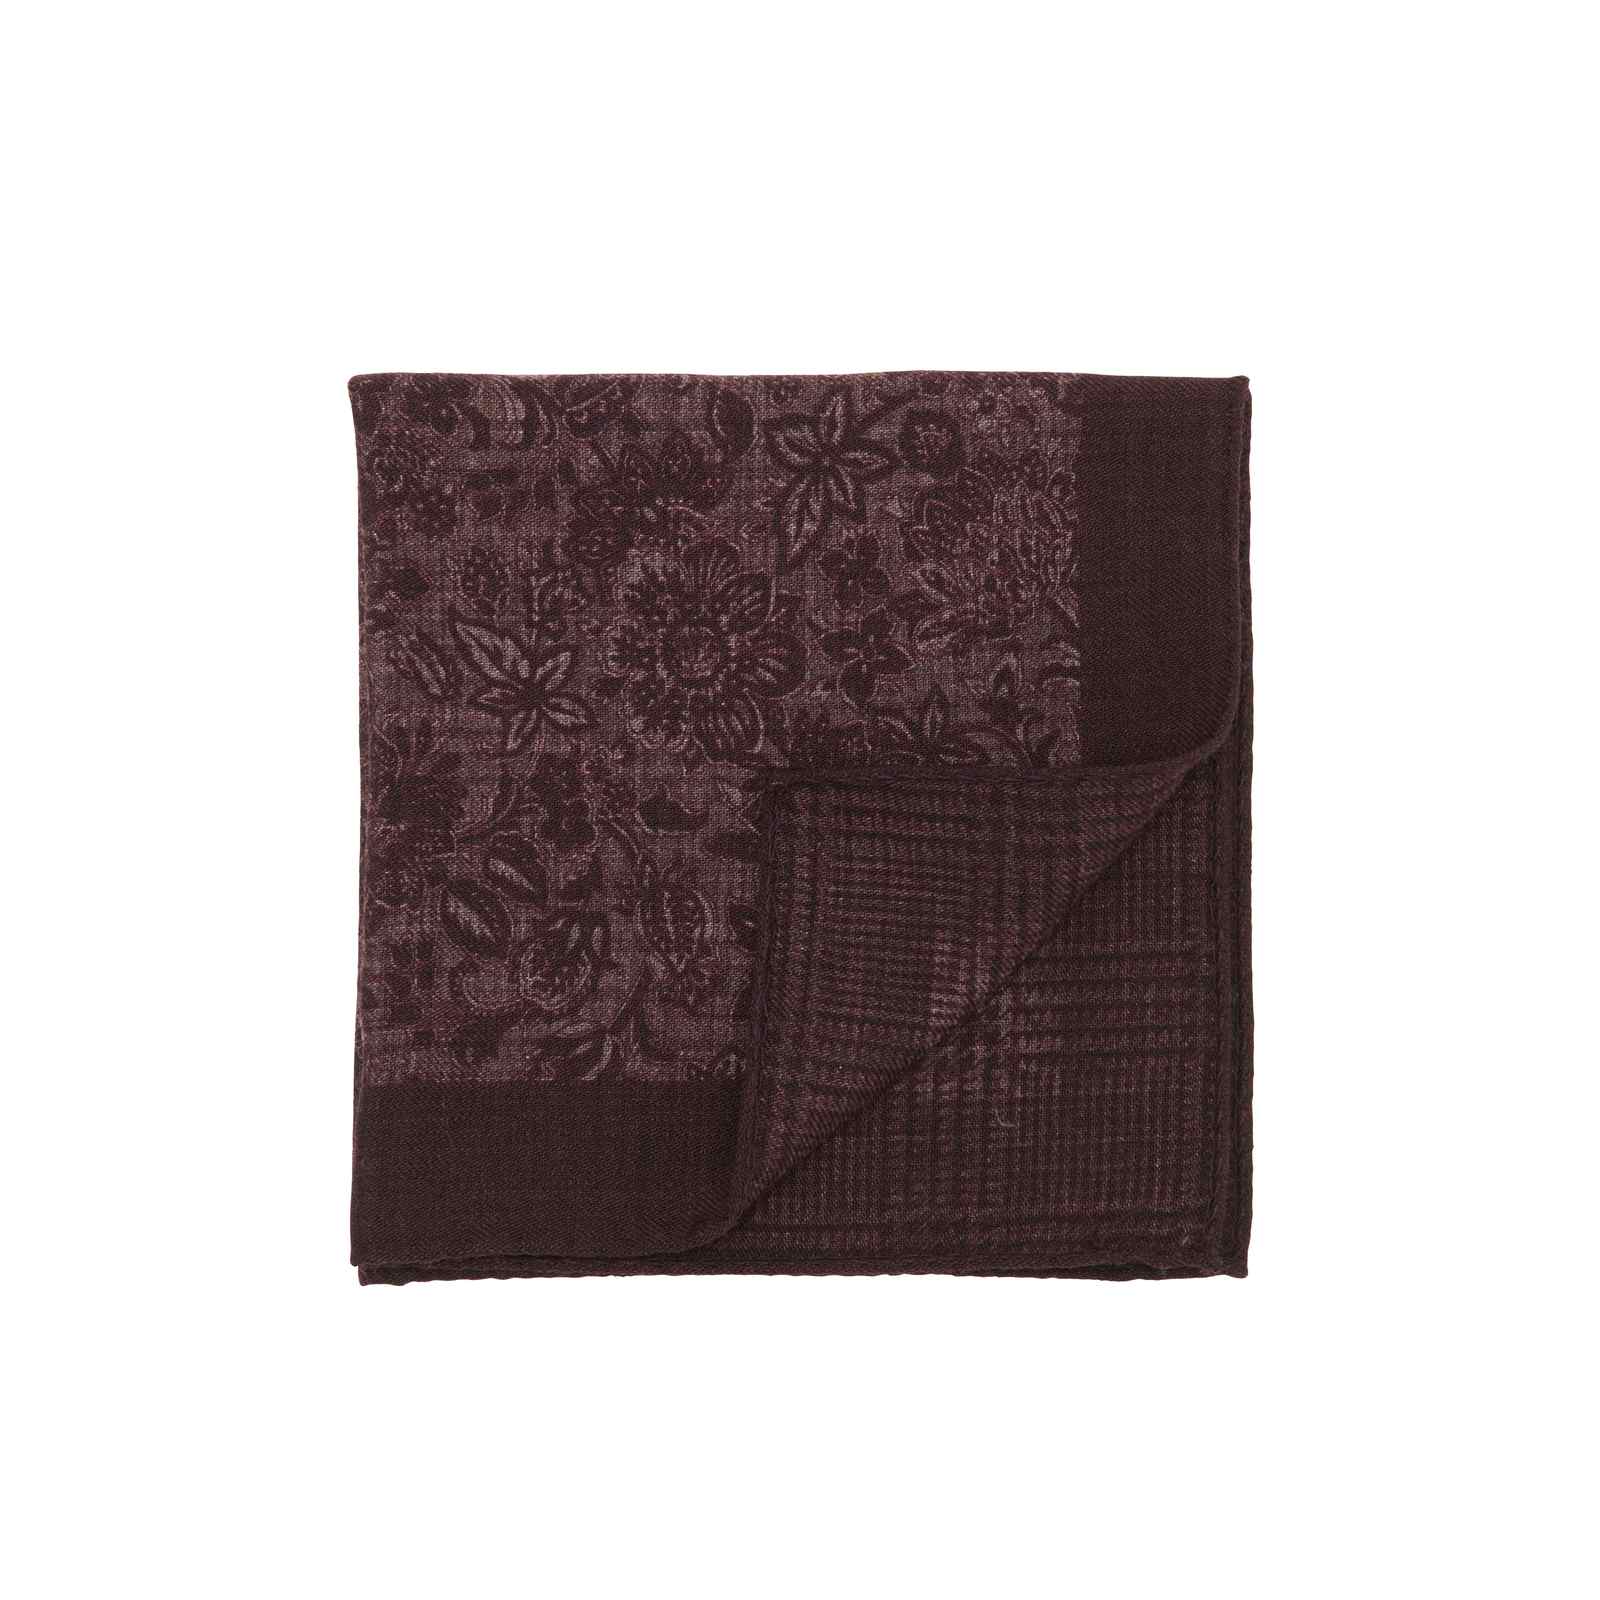 Burgundy and Red Double Sided Floral and Glencheck Pocket Square